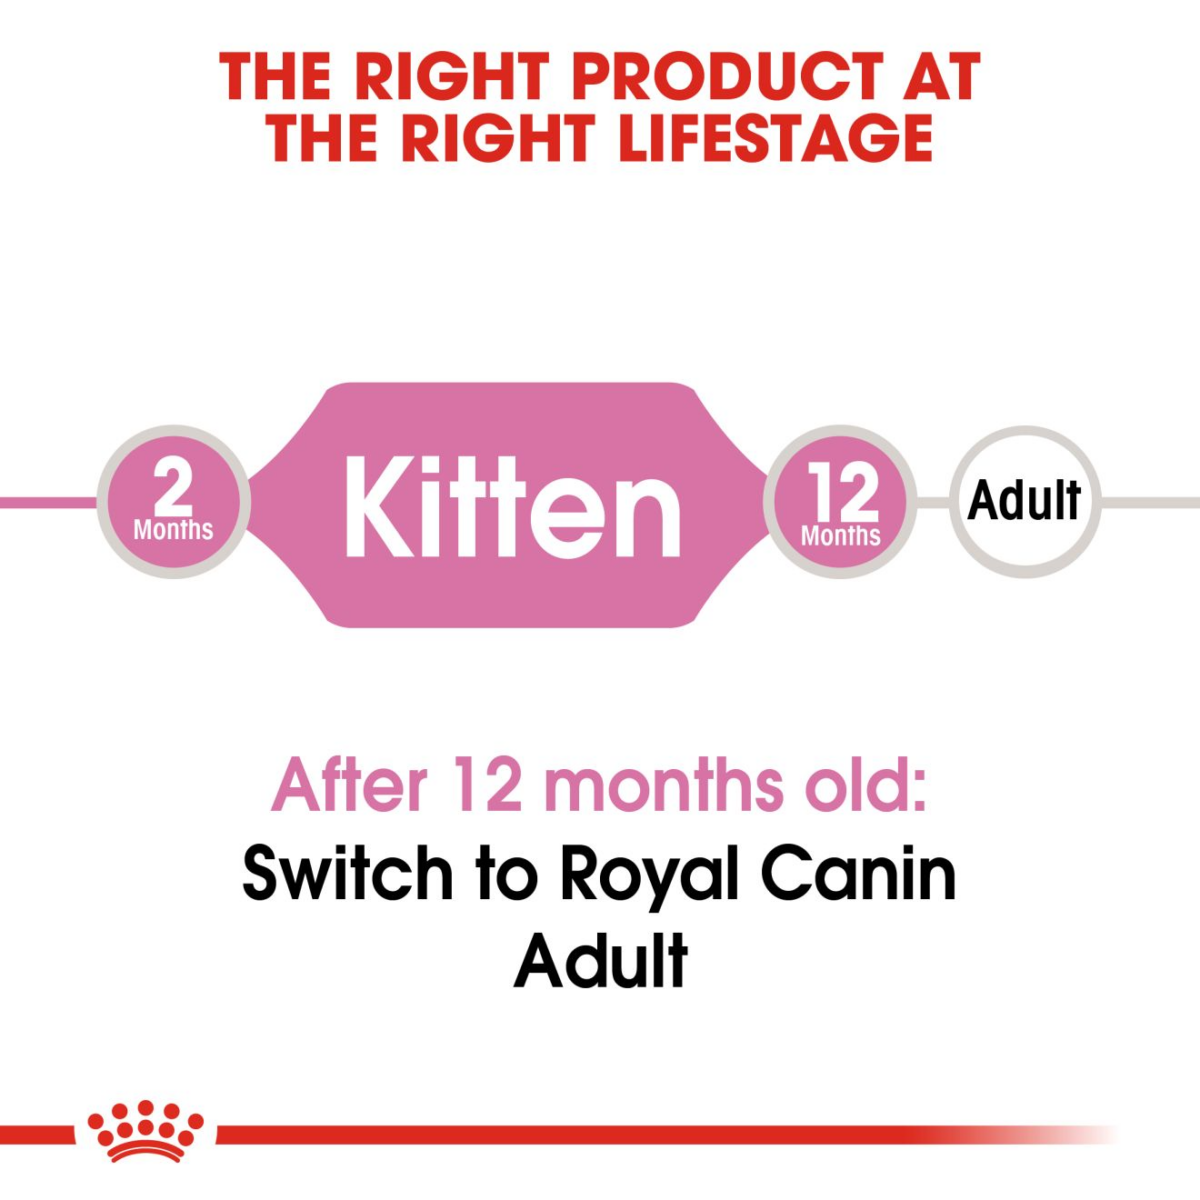 Royal Canin Second Age Dry Kitten Food